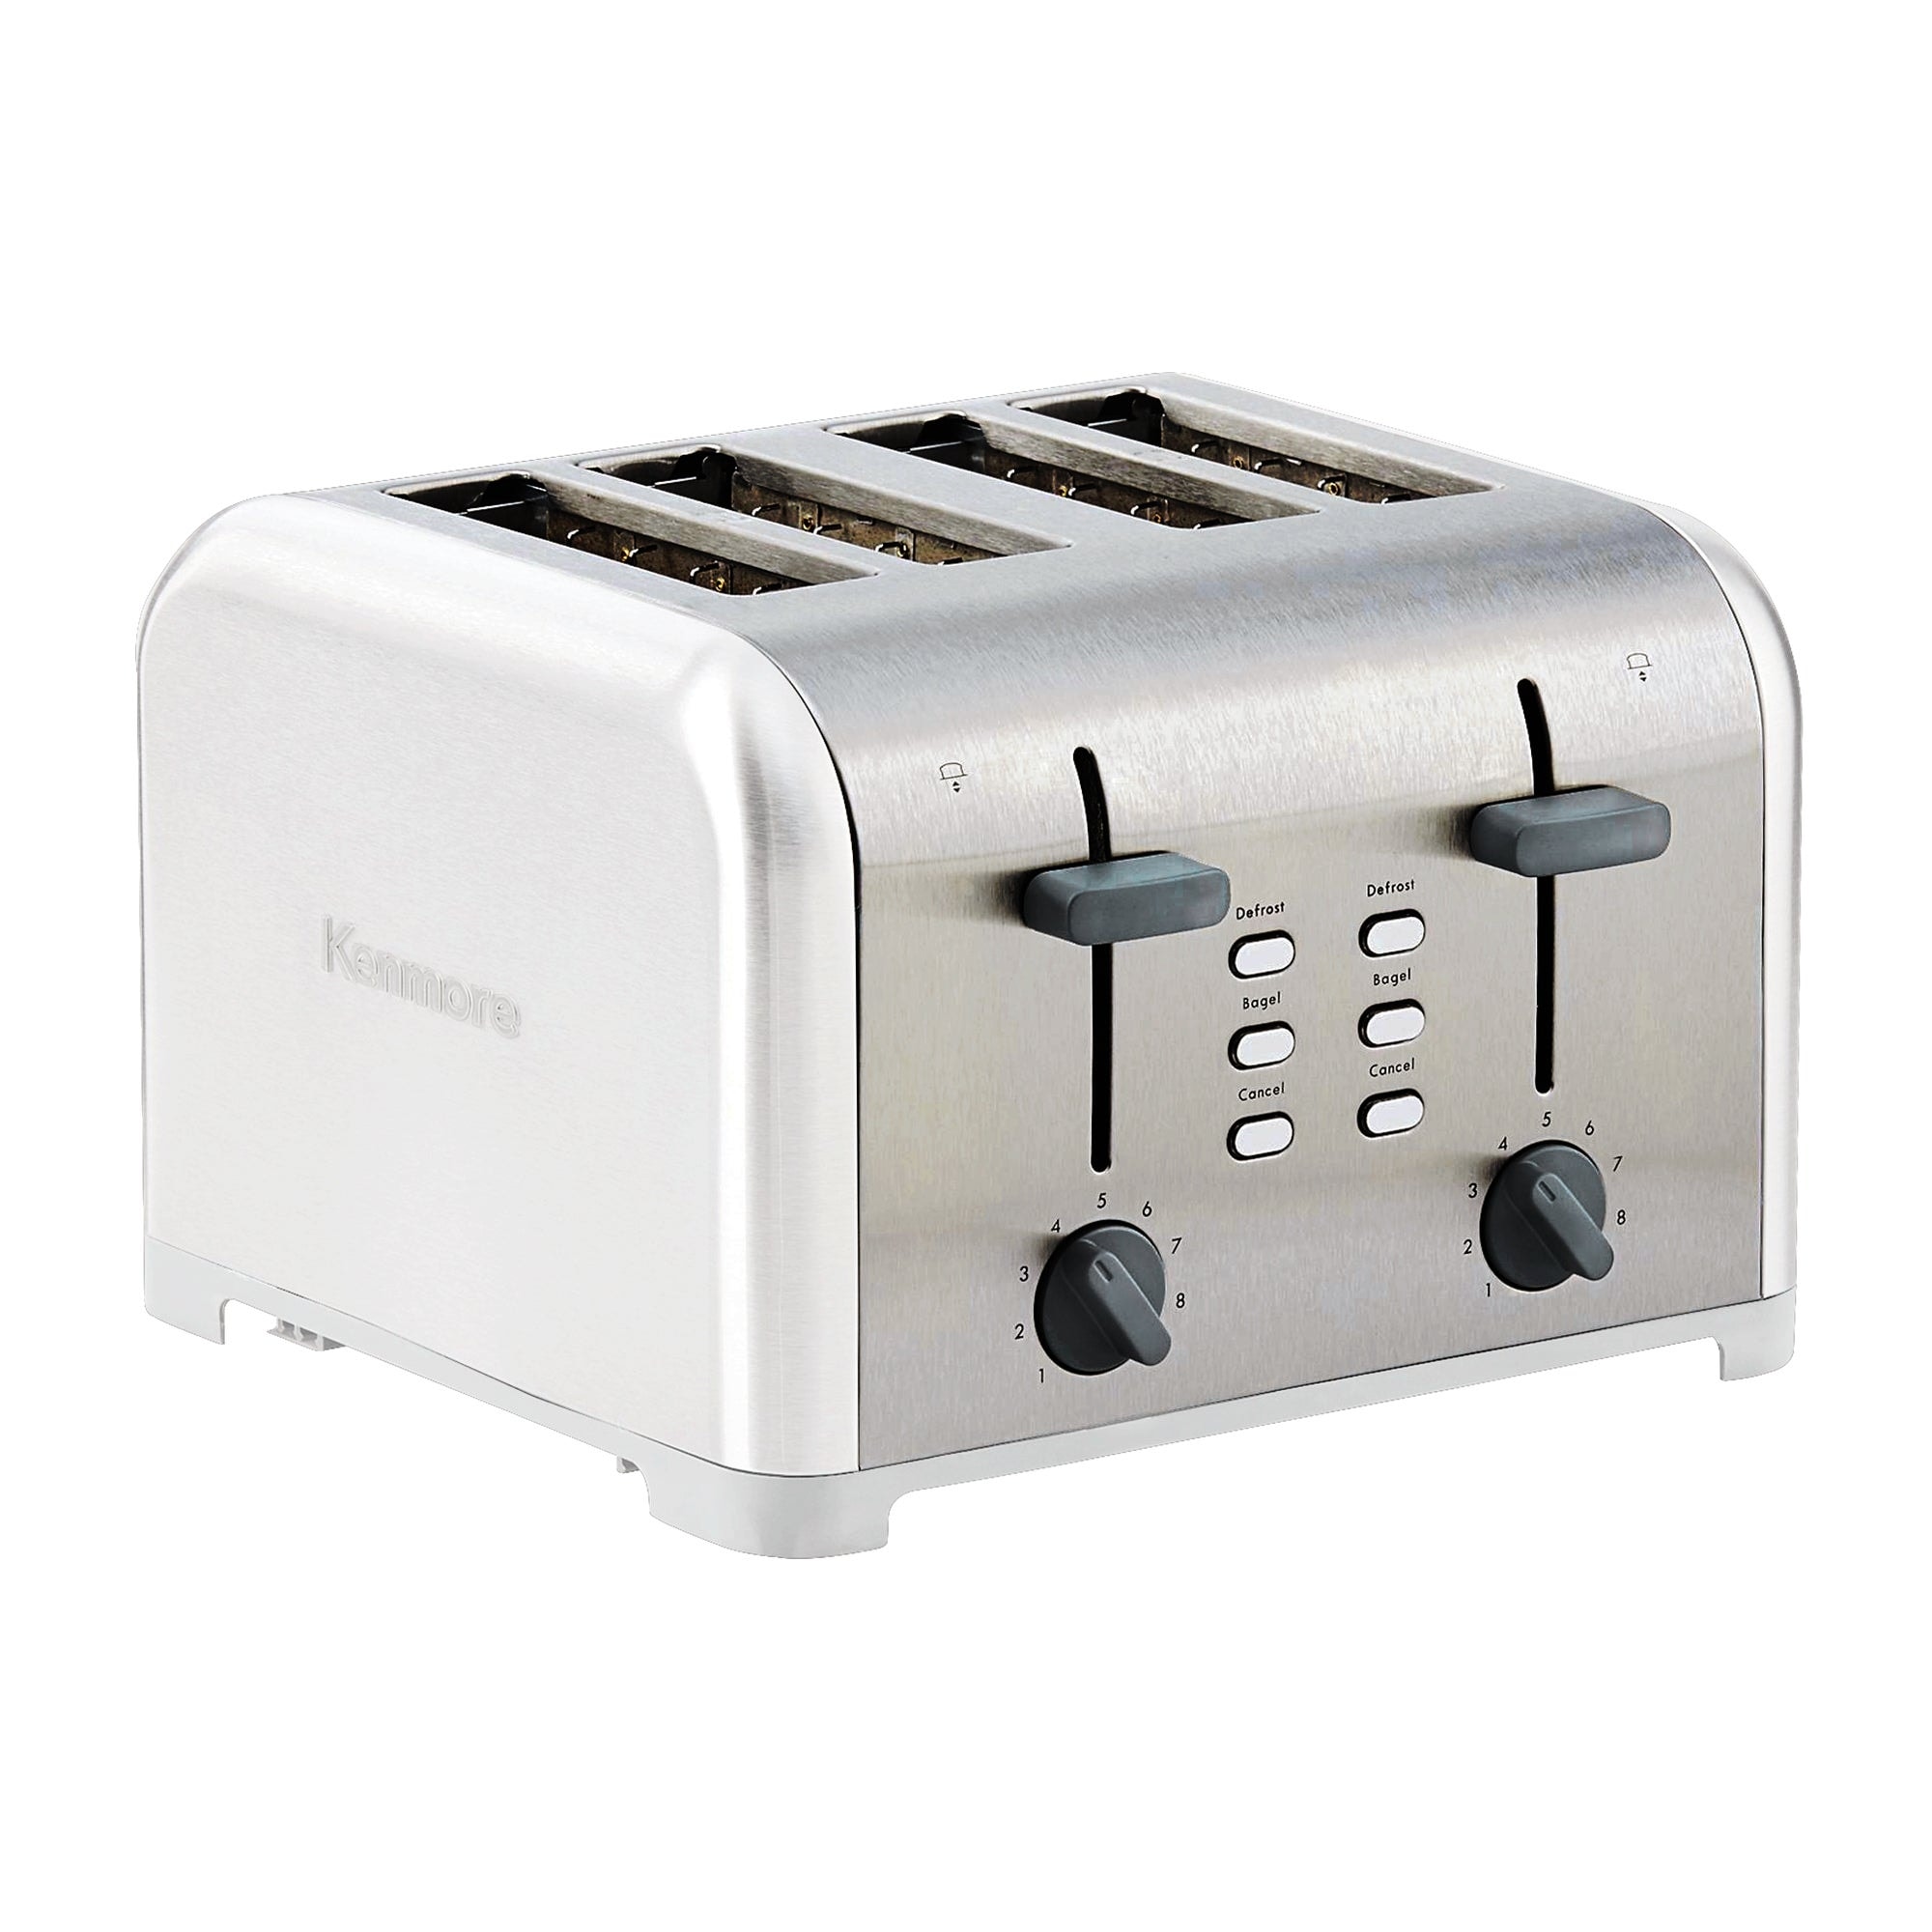 https://ak1.ostkcdn.com/images/products/is/images/direct/3e3d6753b4484f6506d909ab998bc6562968f9bf/Kenmore-4-Slice-Toaster%2C-White-Stainless-Steel%2C-Dual-Controls%2C-Extra-Wide-Slots%2C-Bagel-and-Defrost.jpg